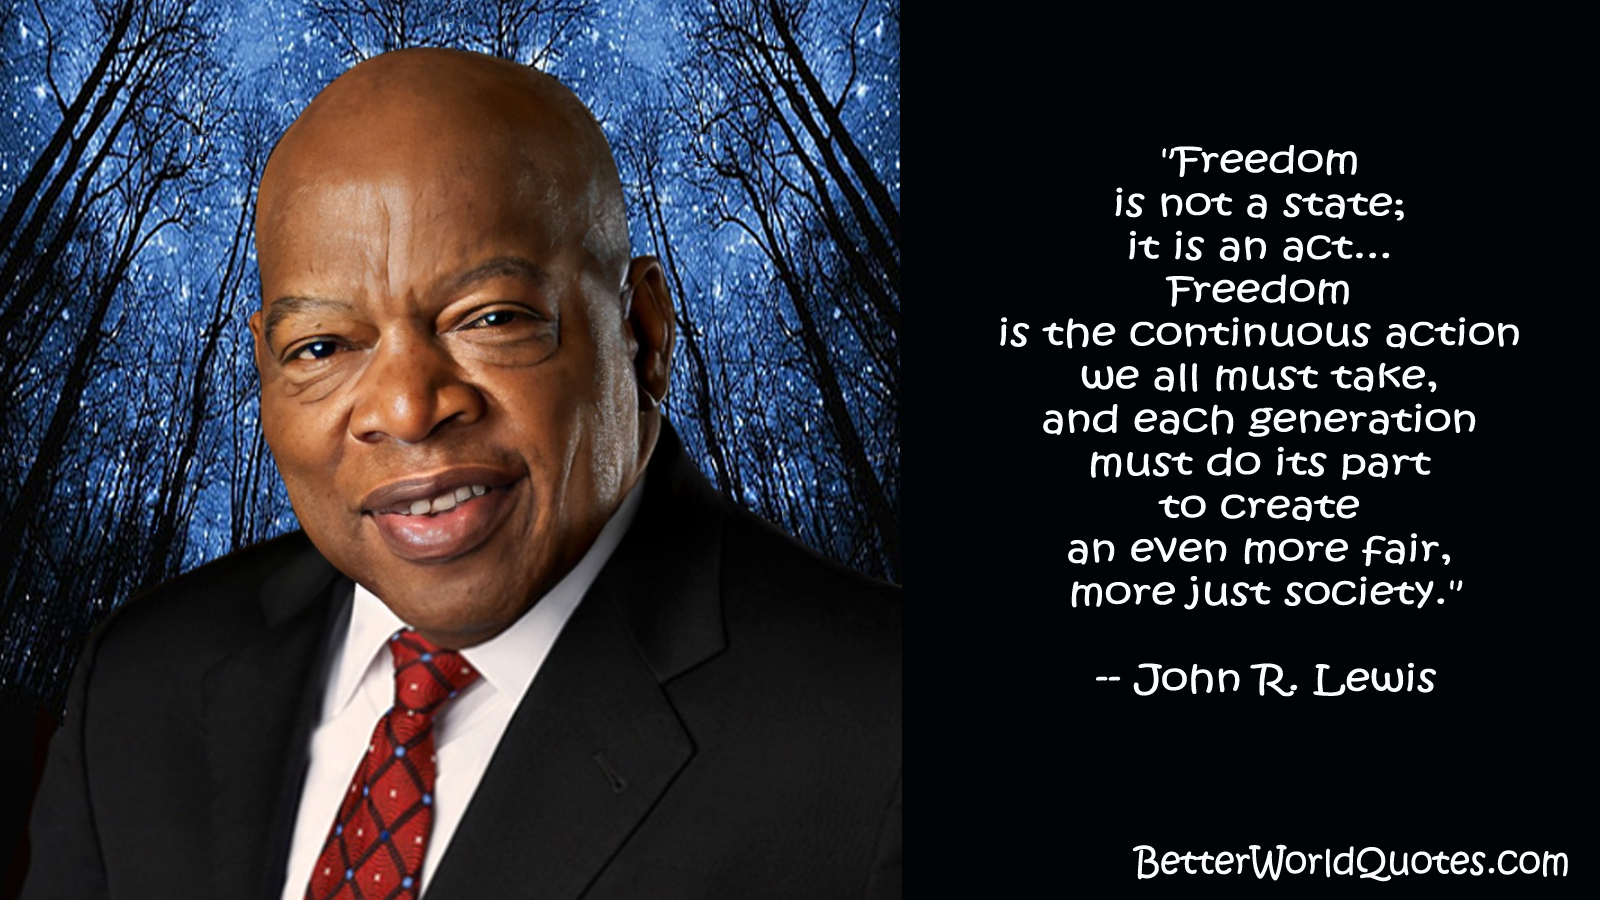 John R. Lewis: Freedom is not a state; it is an act... Freedom is the continuous action we all must take, and each generation must do its part to create an even more fair, more just society.